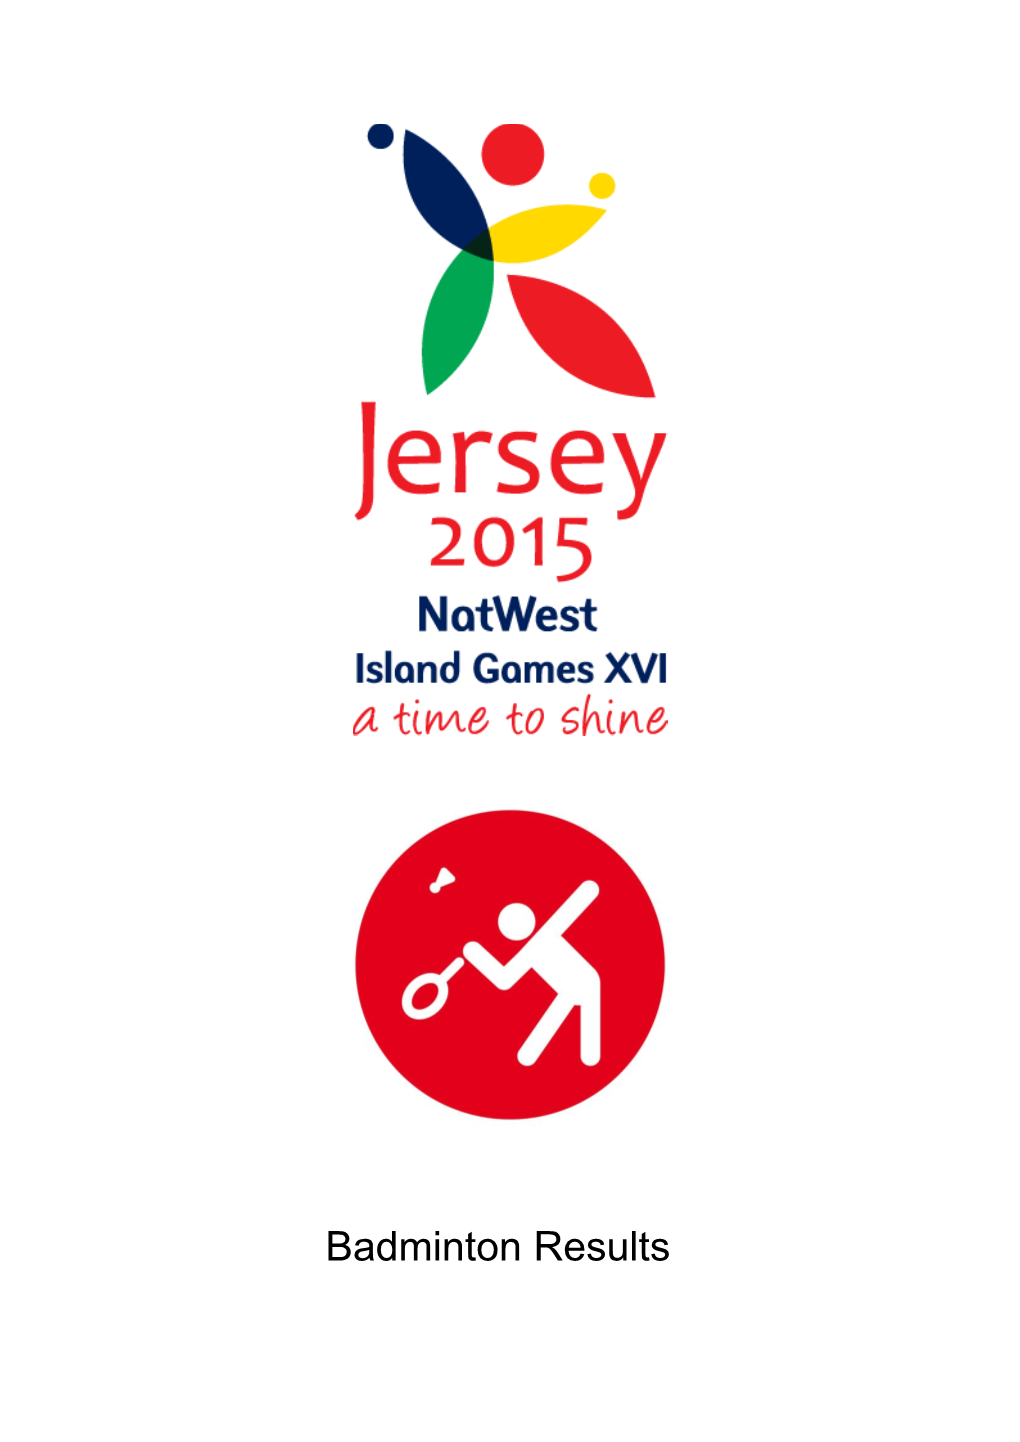 Badminton Results Natwest Island Games ‐ Jersey 2015